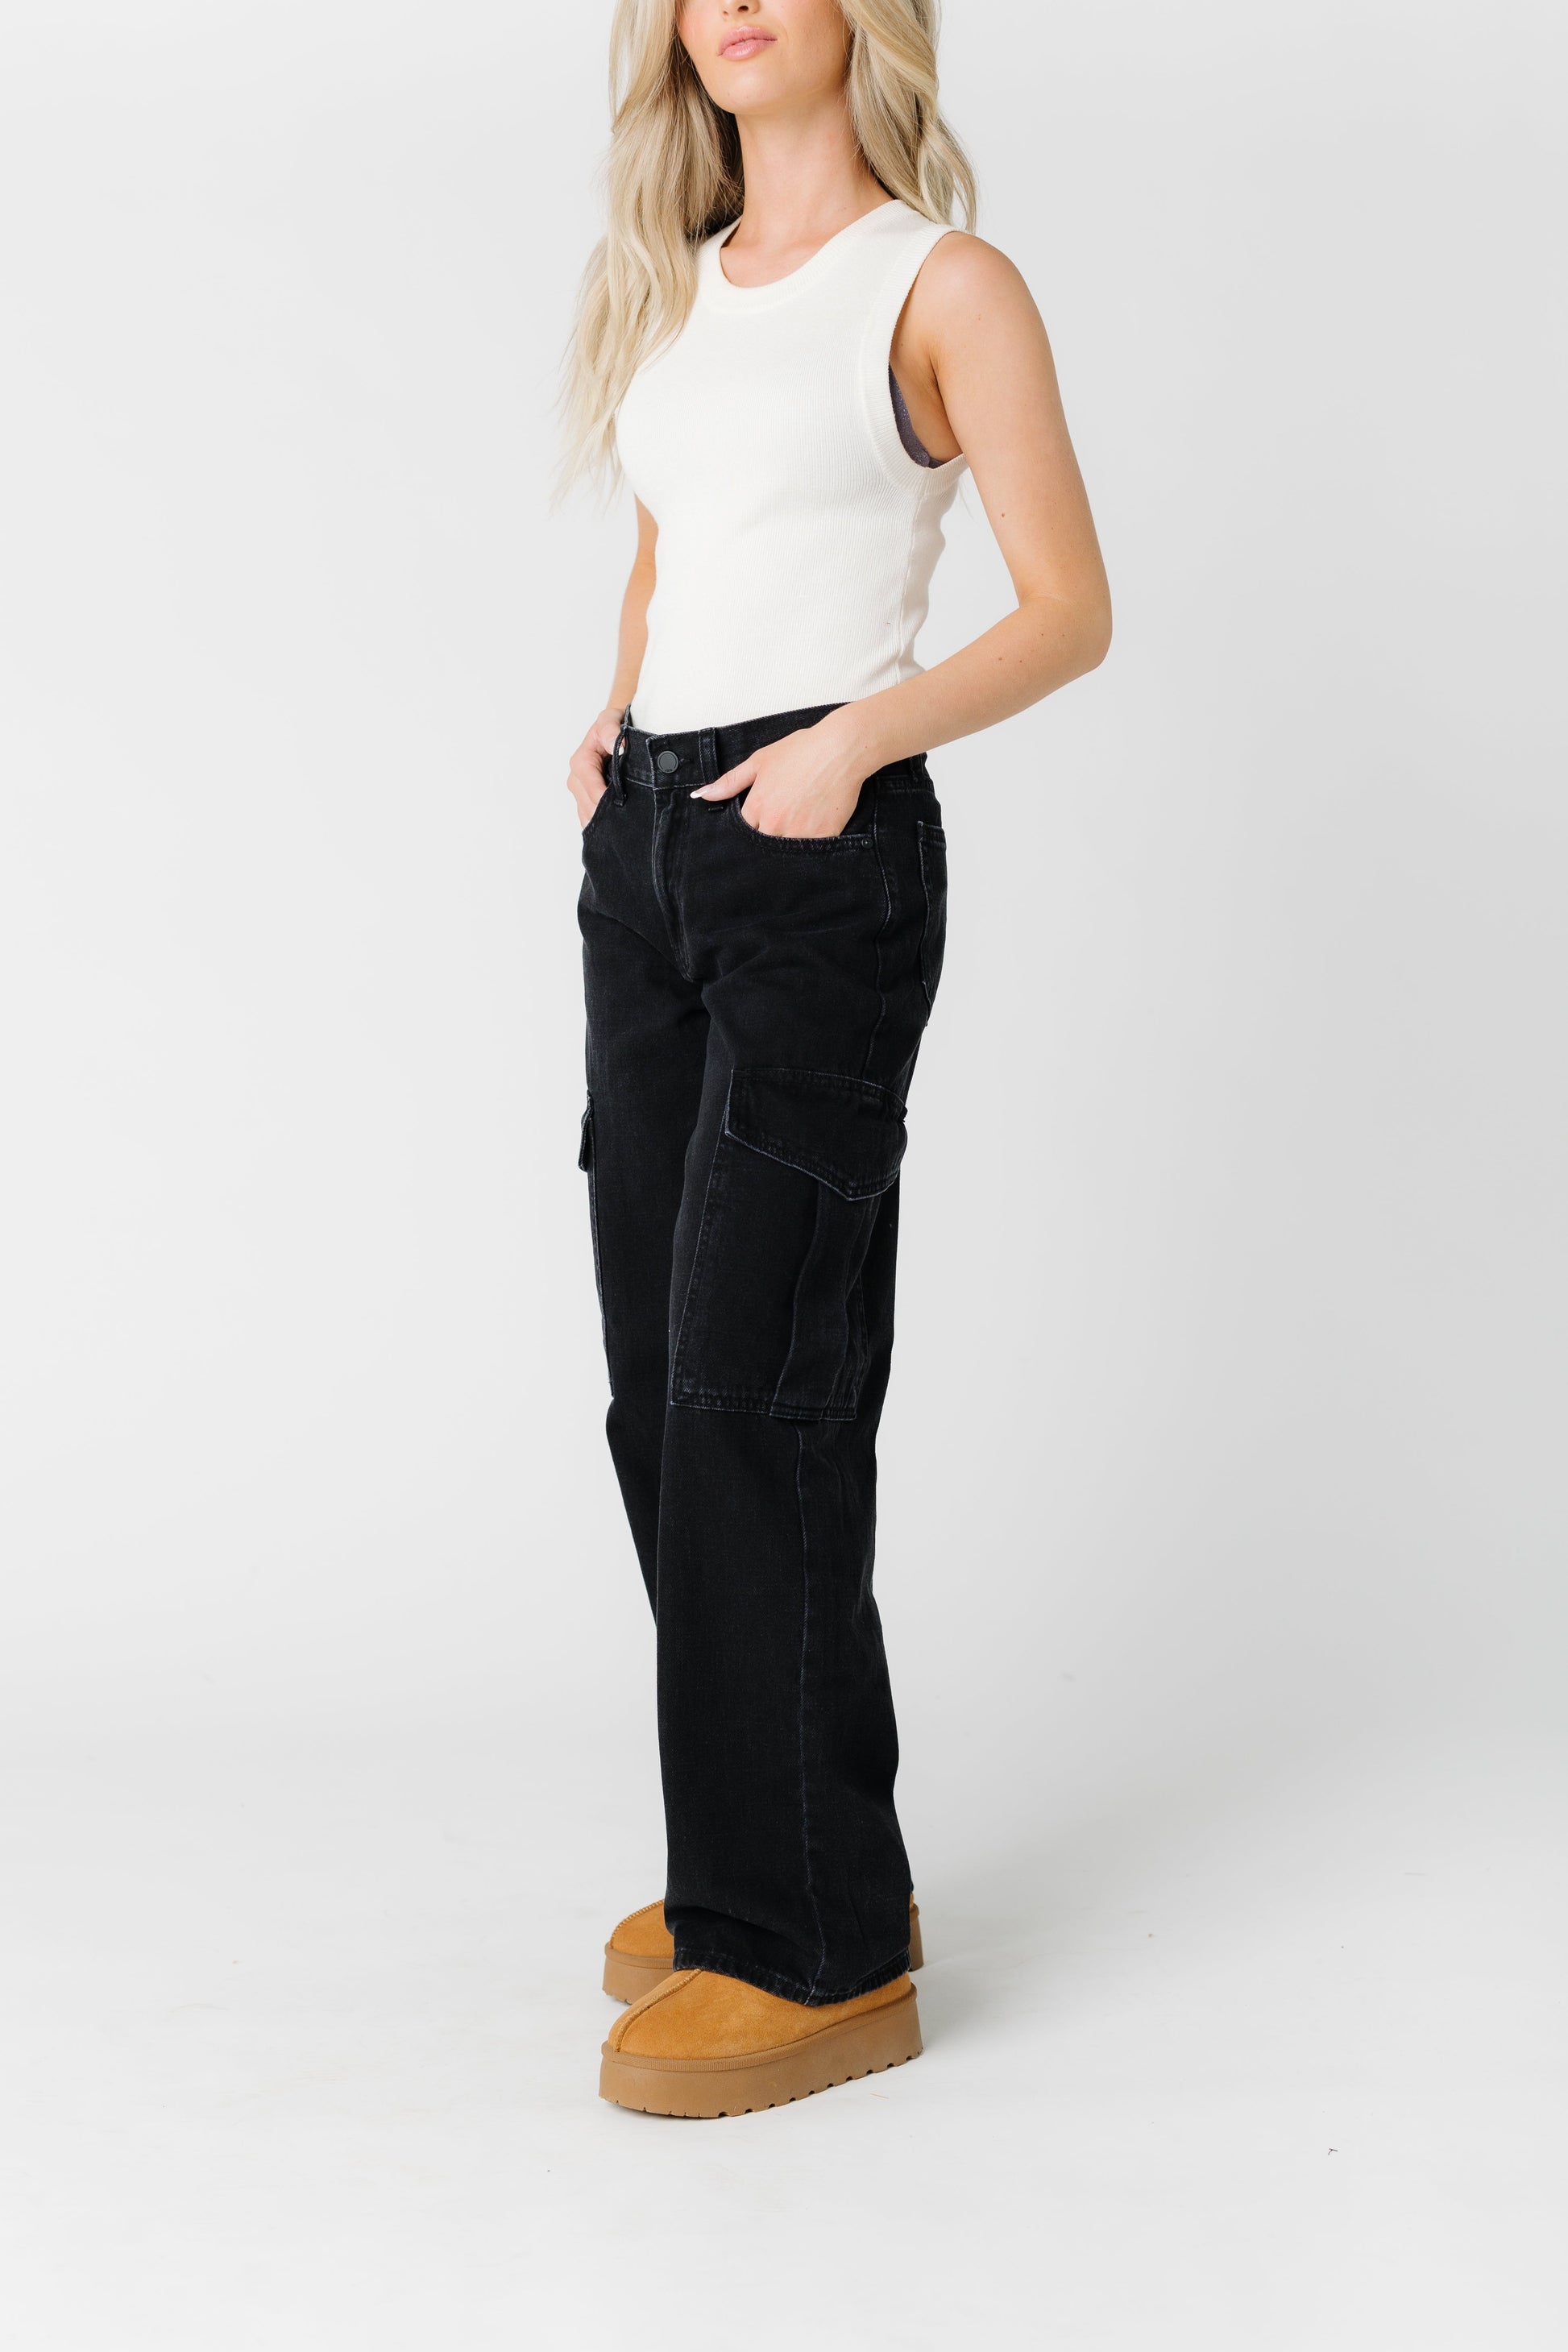 Day to Day Cargo Jeans WOMEN'S DENIM Just Panmaco Inc. 